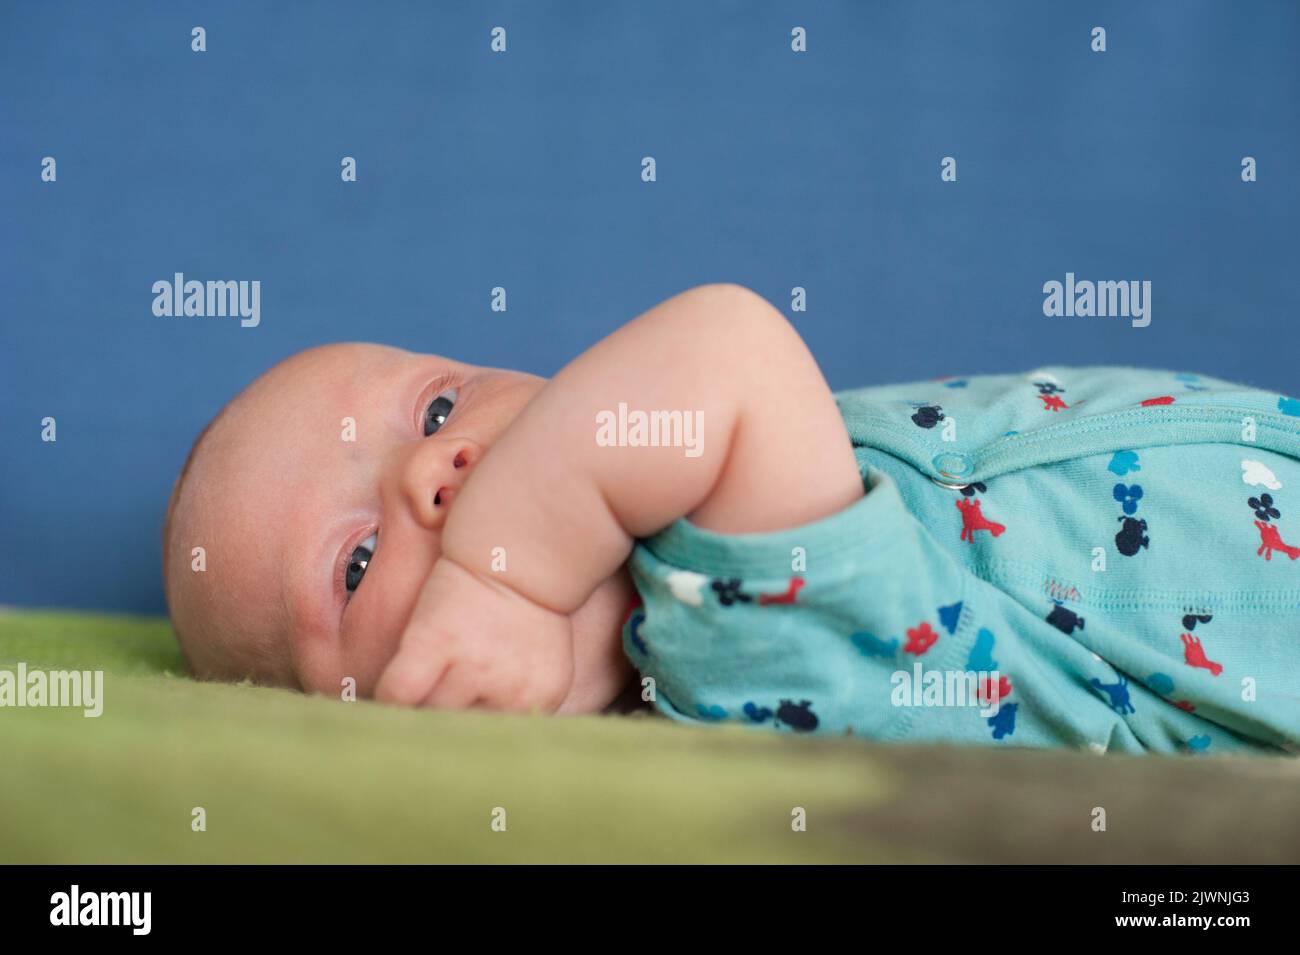 A portrait of a three-month-old baby on a crocheted blanket chews on her wrist. Stock Photo